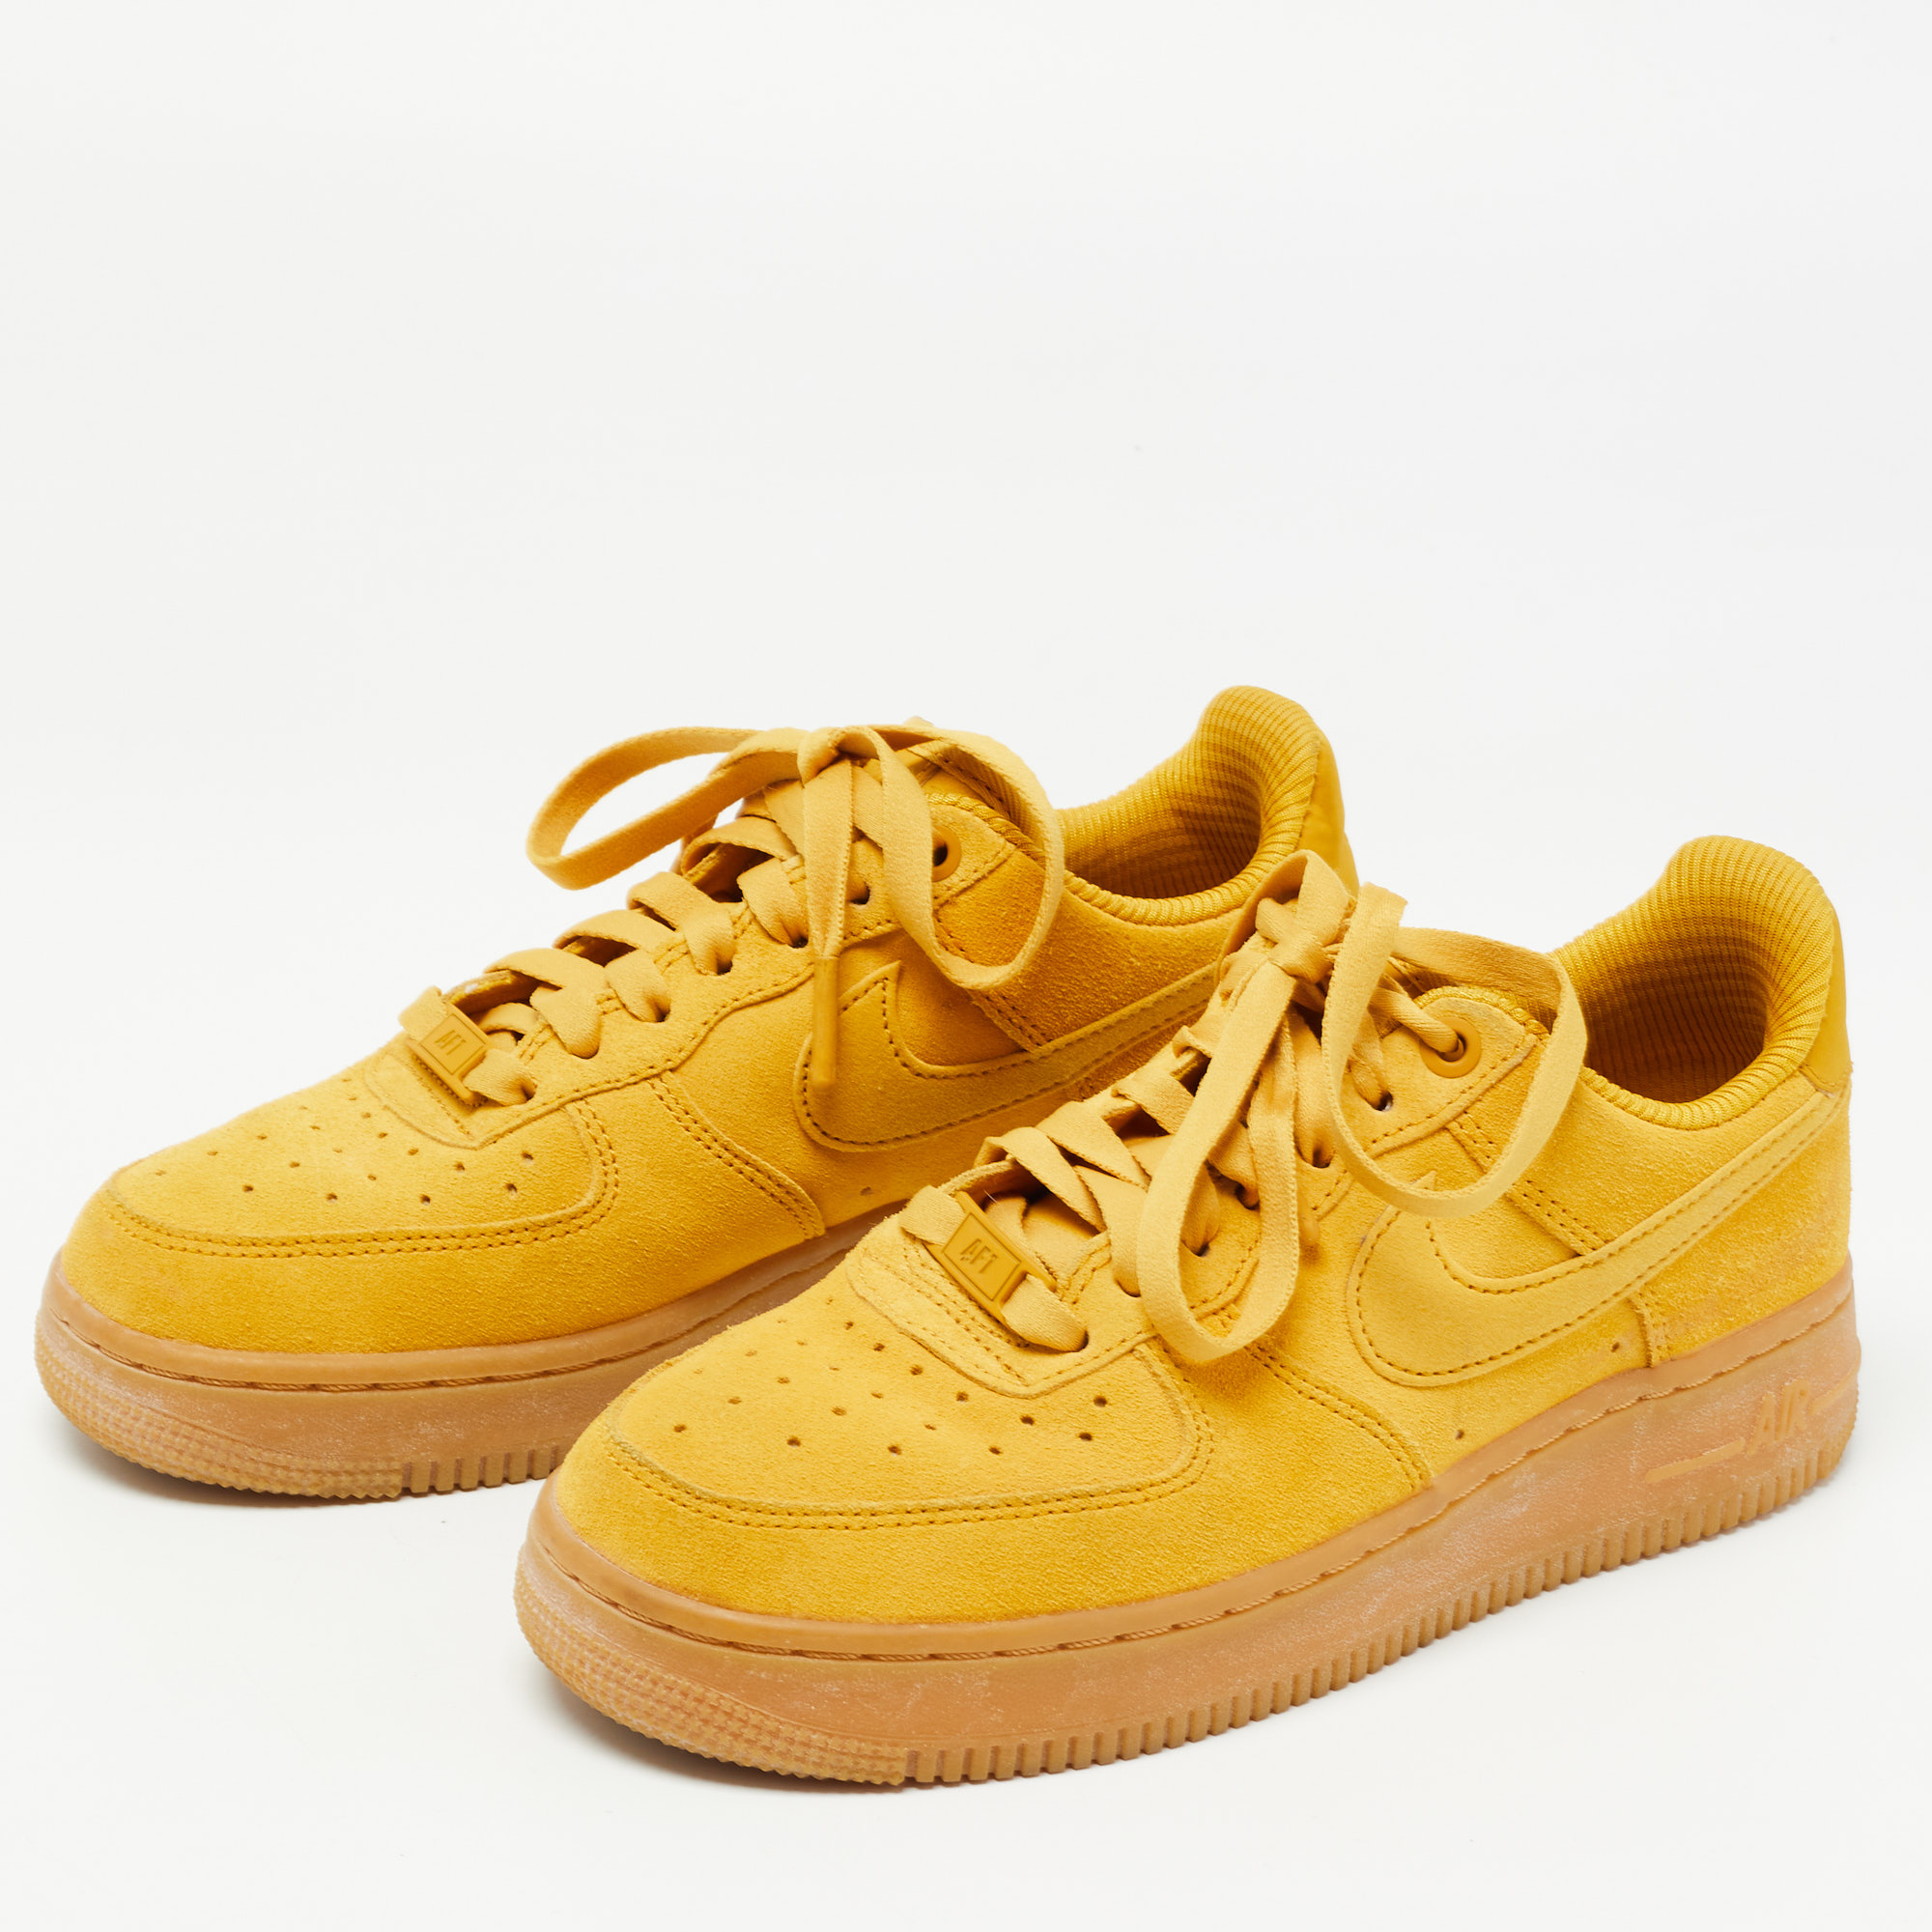 

Nike Air Yellow Suede and Leather Force 1 Low Mineral Gum Sneakers Size